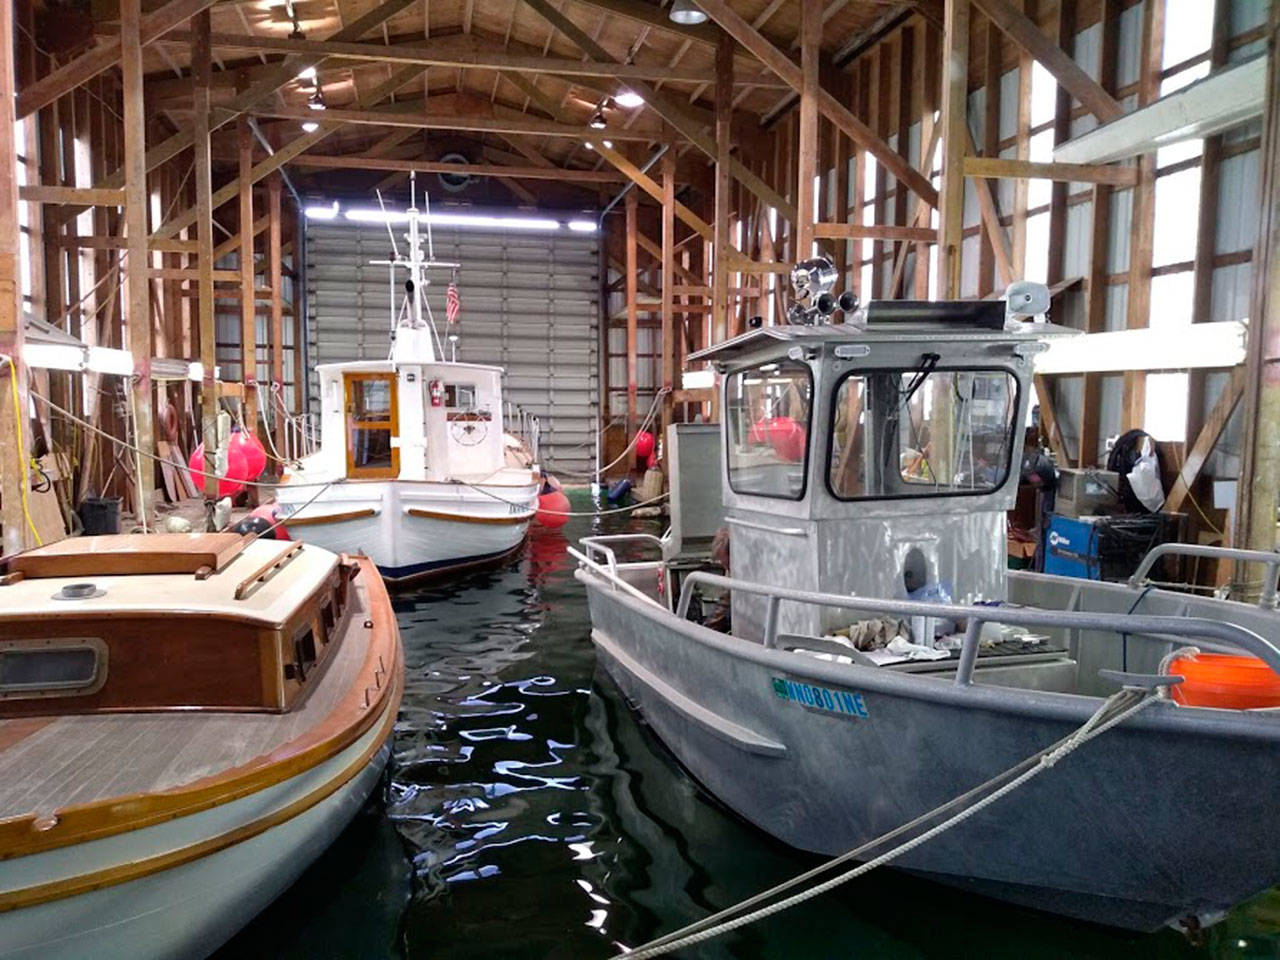 Dunato’s Boat Yard is building a smaller vessel, seen on the right, which will be used for reclamation efforts on Lake Sammamish and smaller waterways in the area. Aaron Kunkler/staff photo